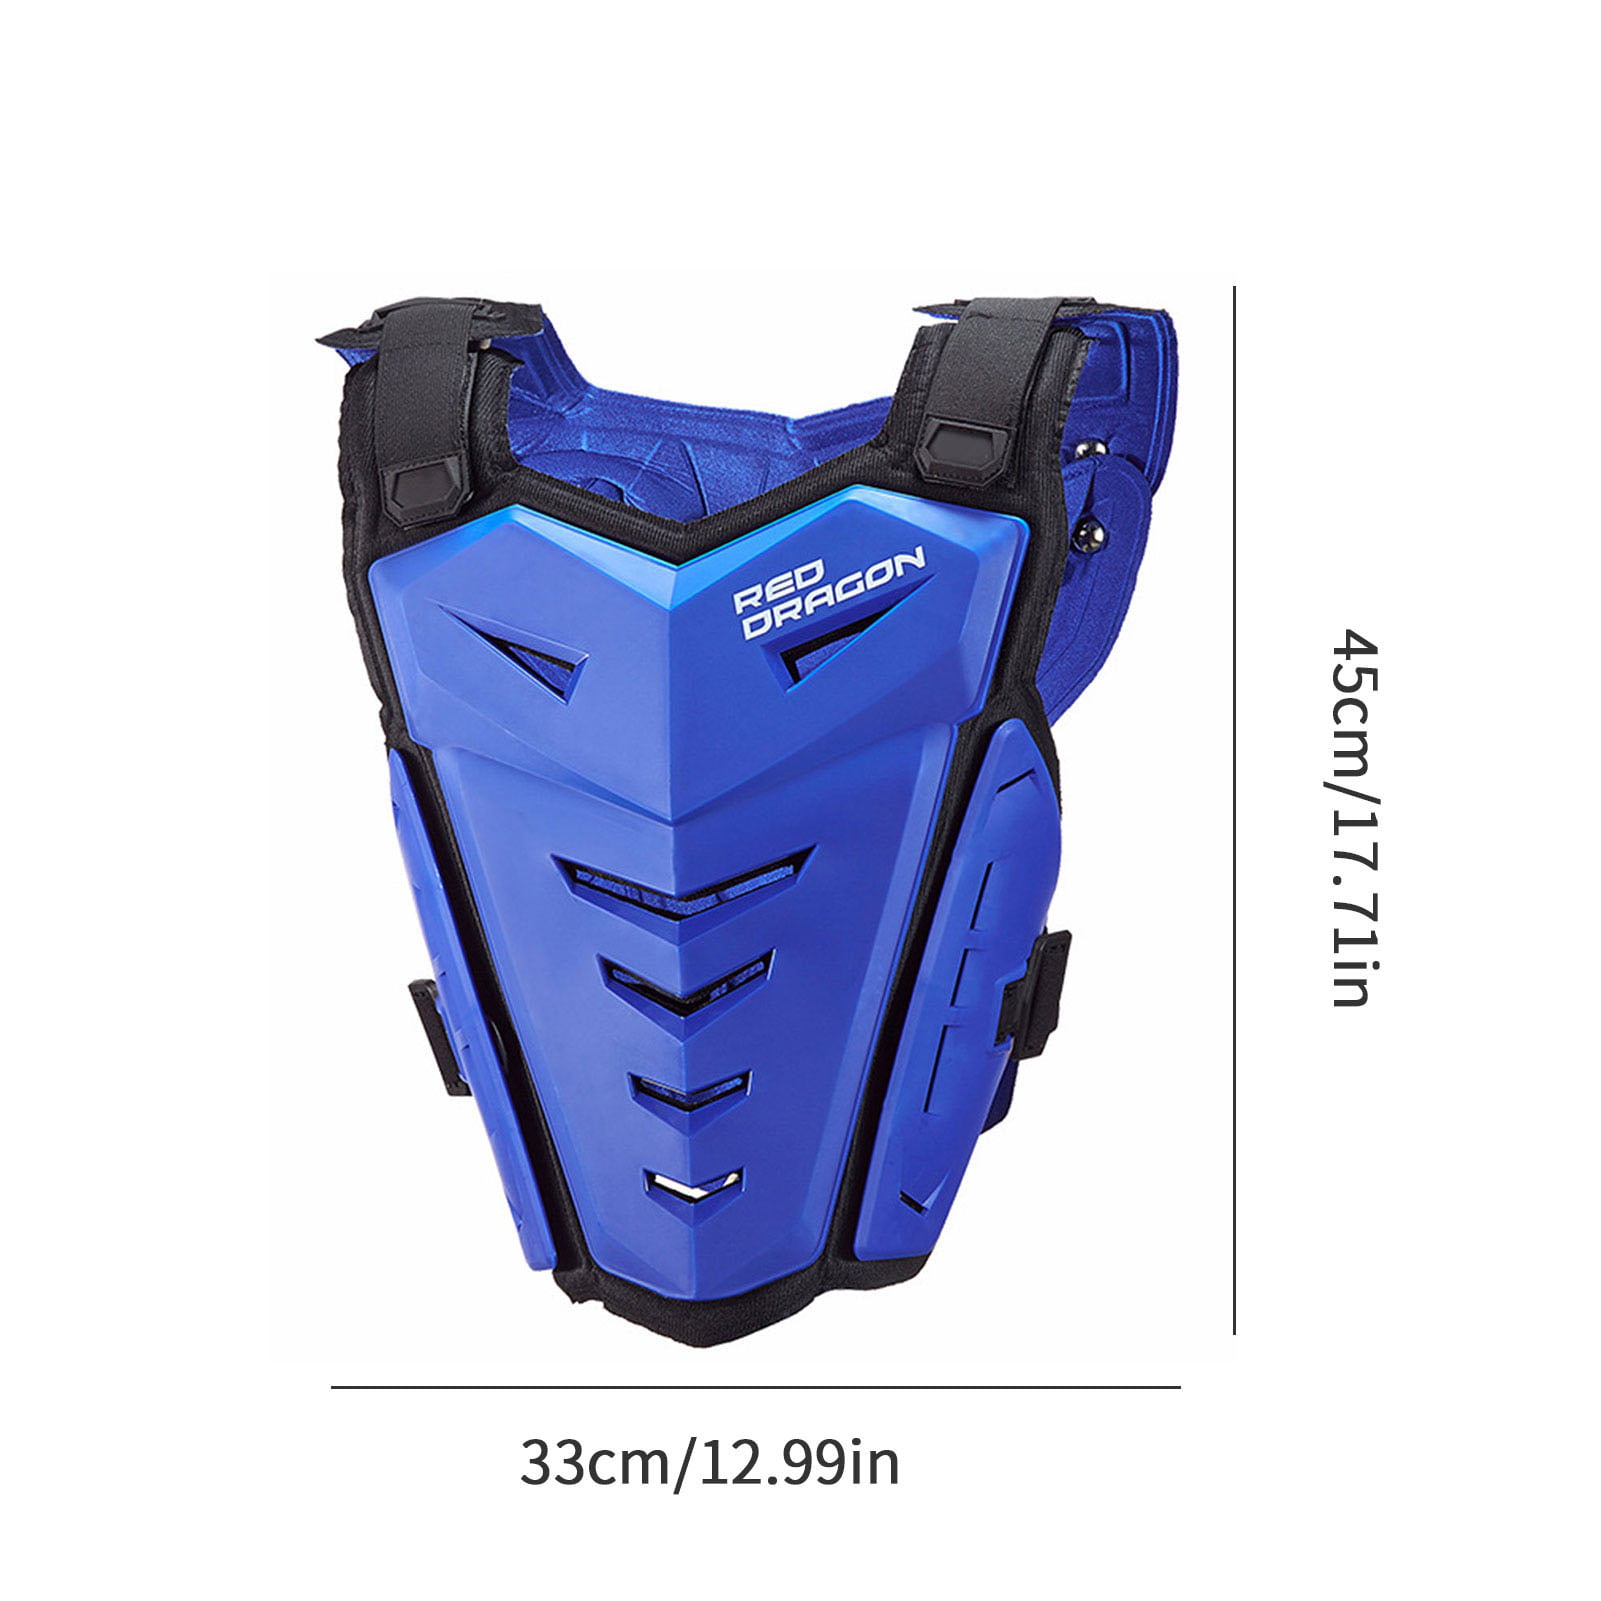 Ridbiker Motorcycle Armor Vest Motorcycle Riding Chest Armor Back Protector Armor Motocross Off-Road Racing Vest,Blue 